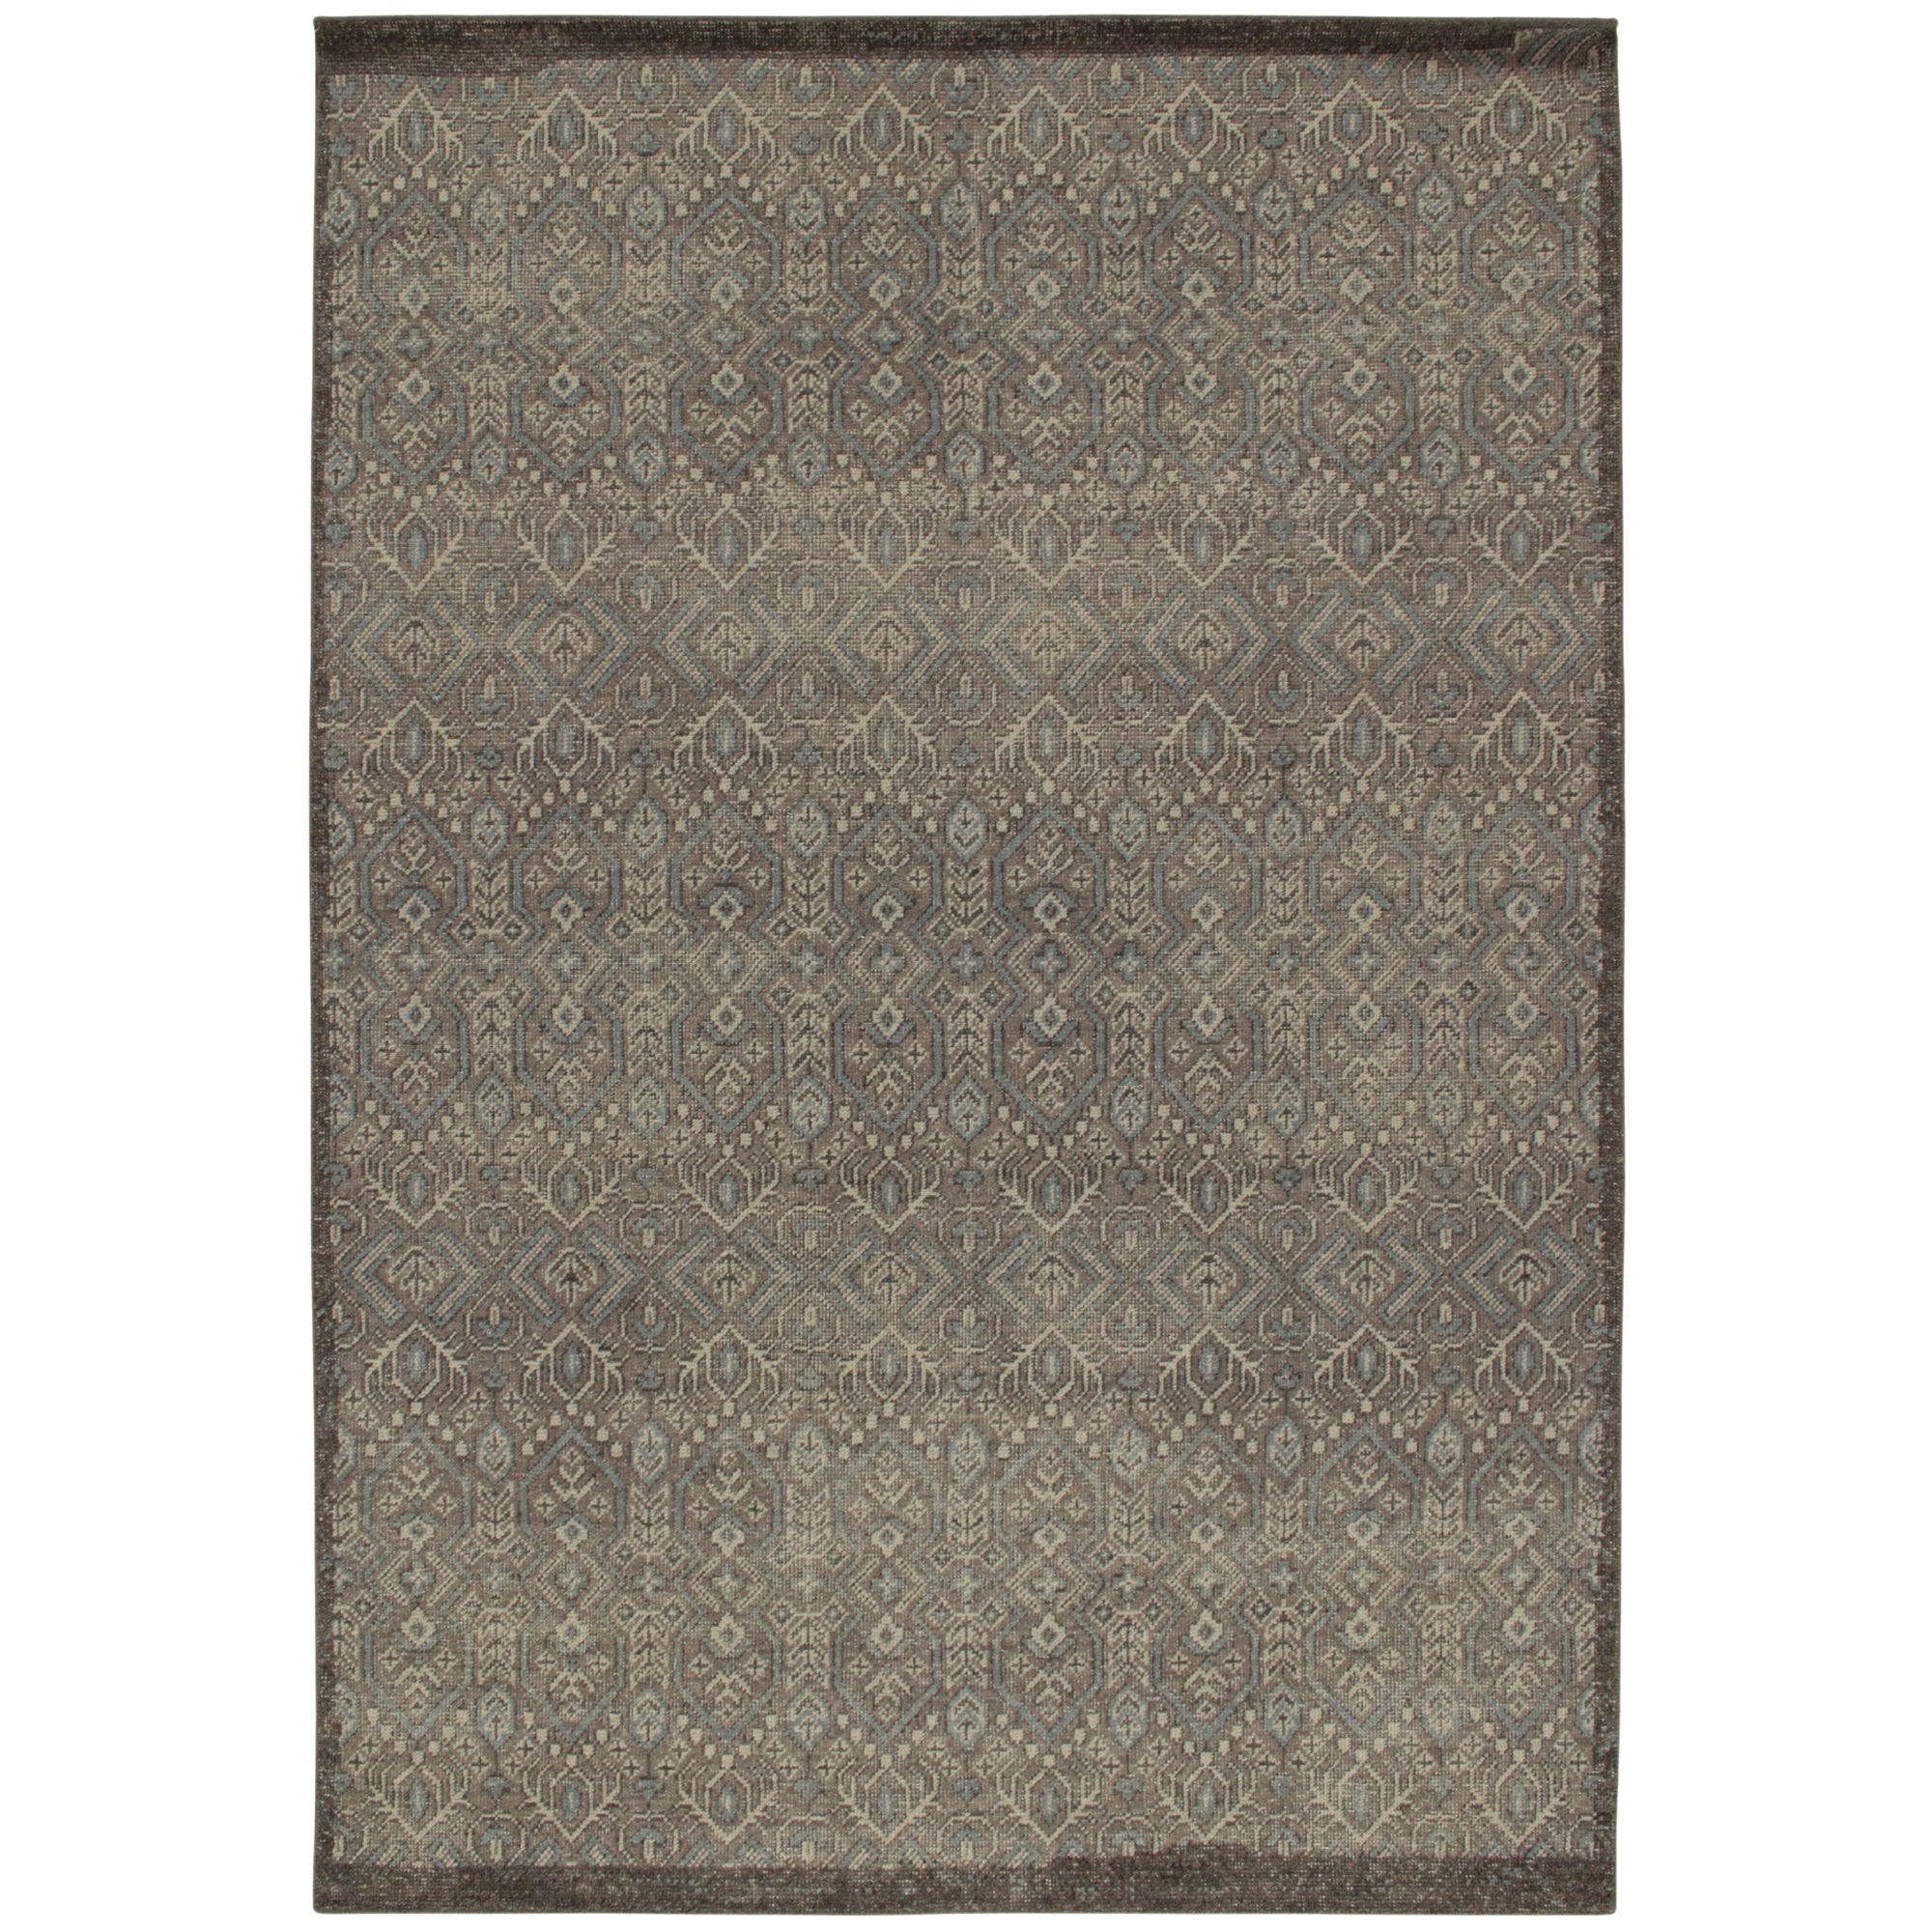 Rug & Kilim’s Distressed Tribal Style Rug in Grey and Blue Geometric Patterns